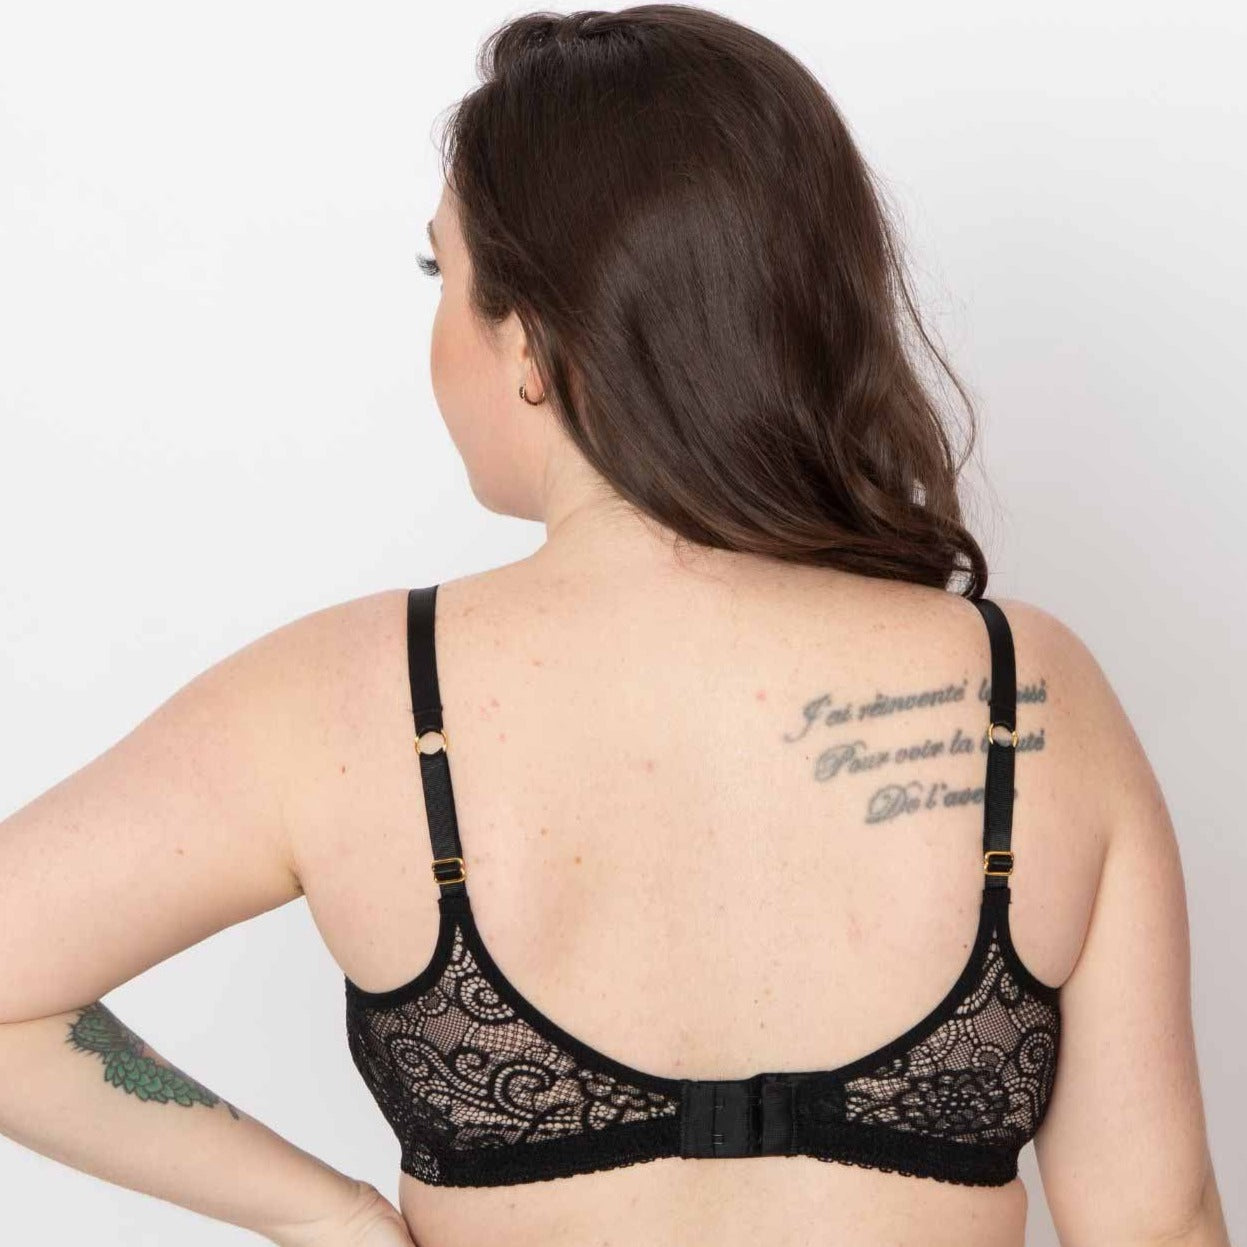 Gloria Pocketed Lace Bra in Black | Mastectomy Lingerie by AnaOno